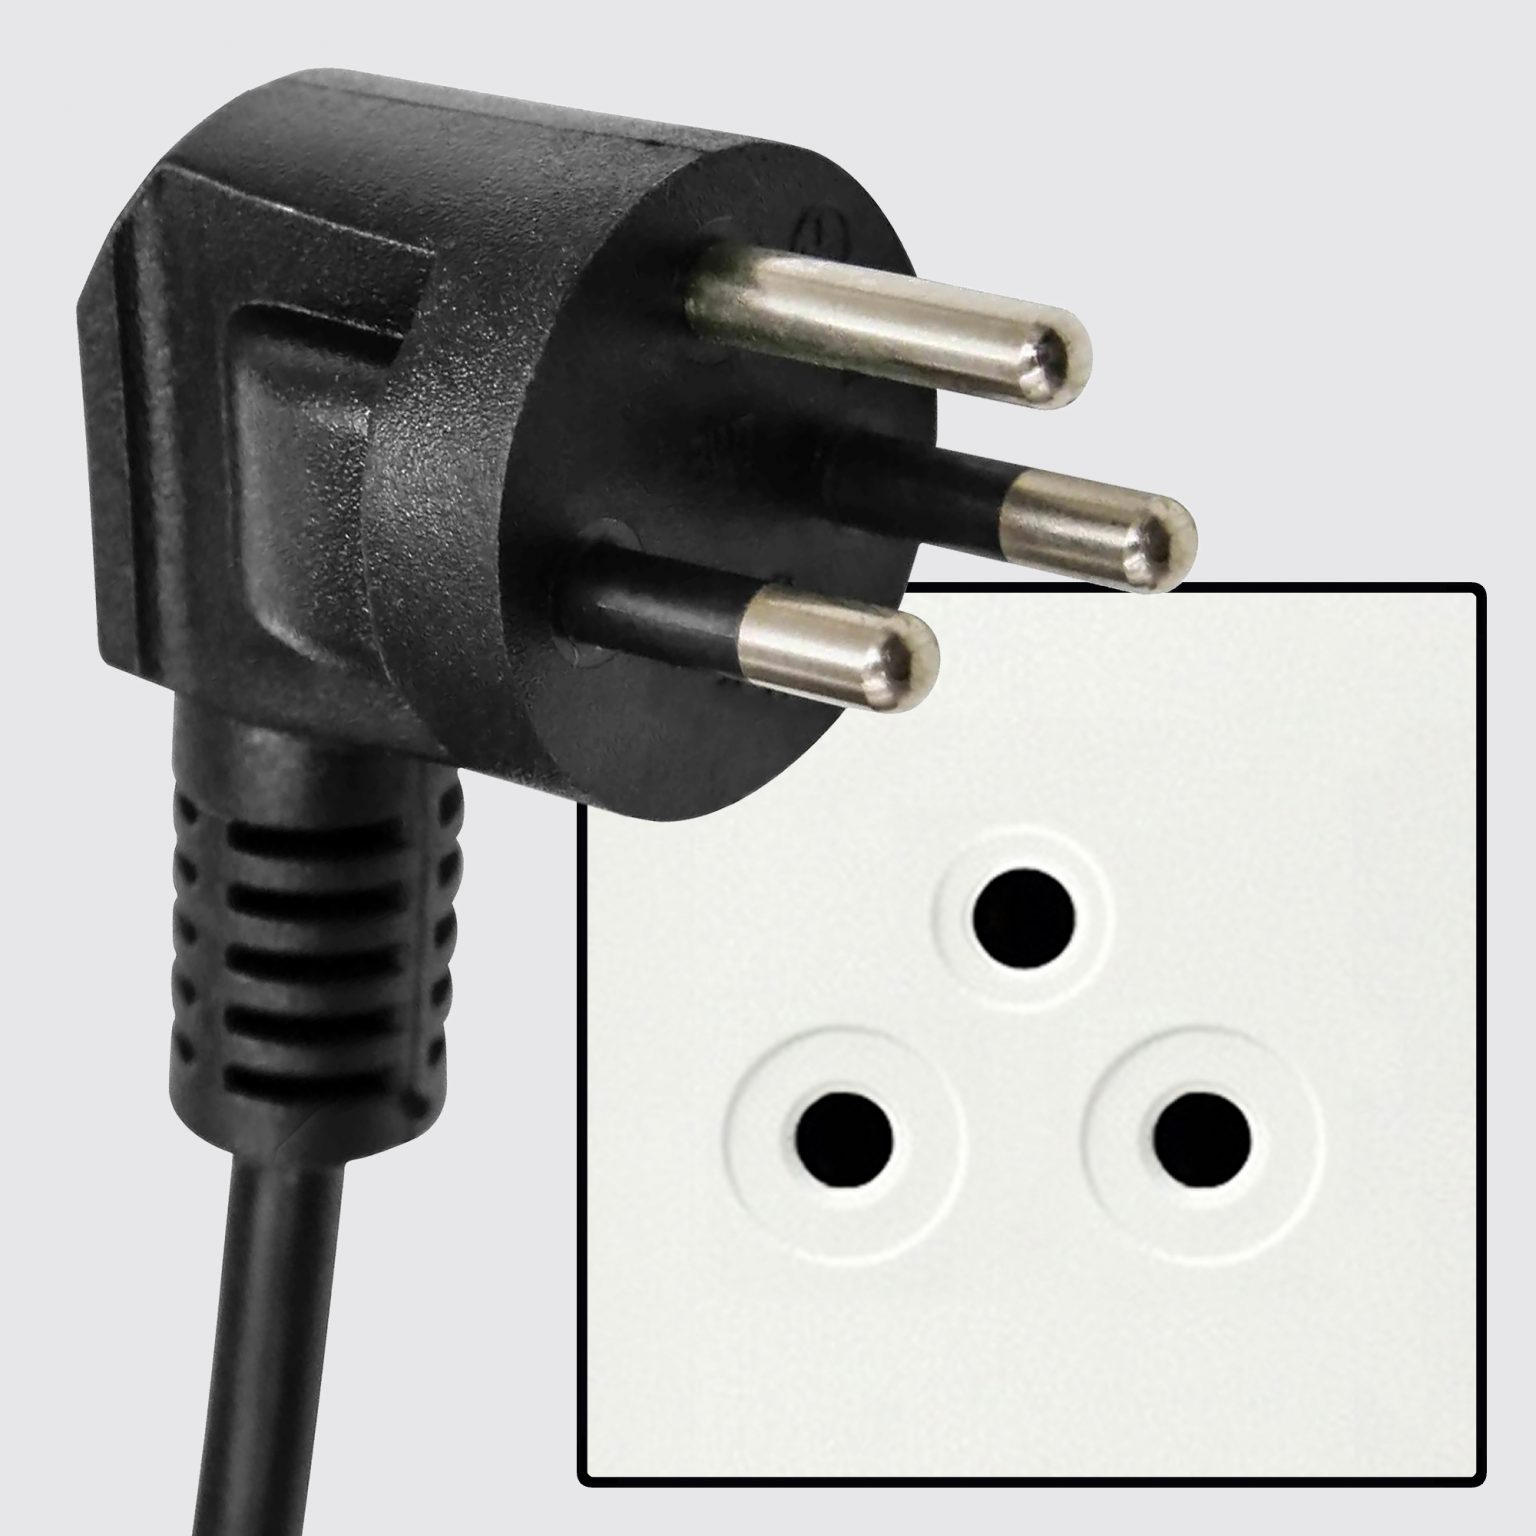 travel adaptor used in thailand